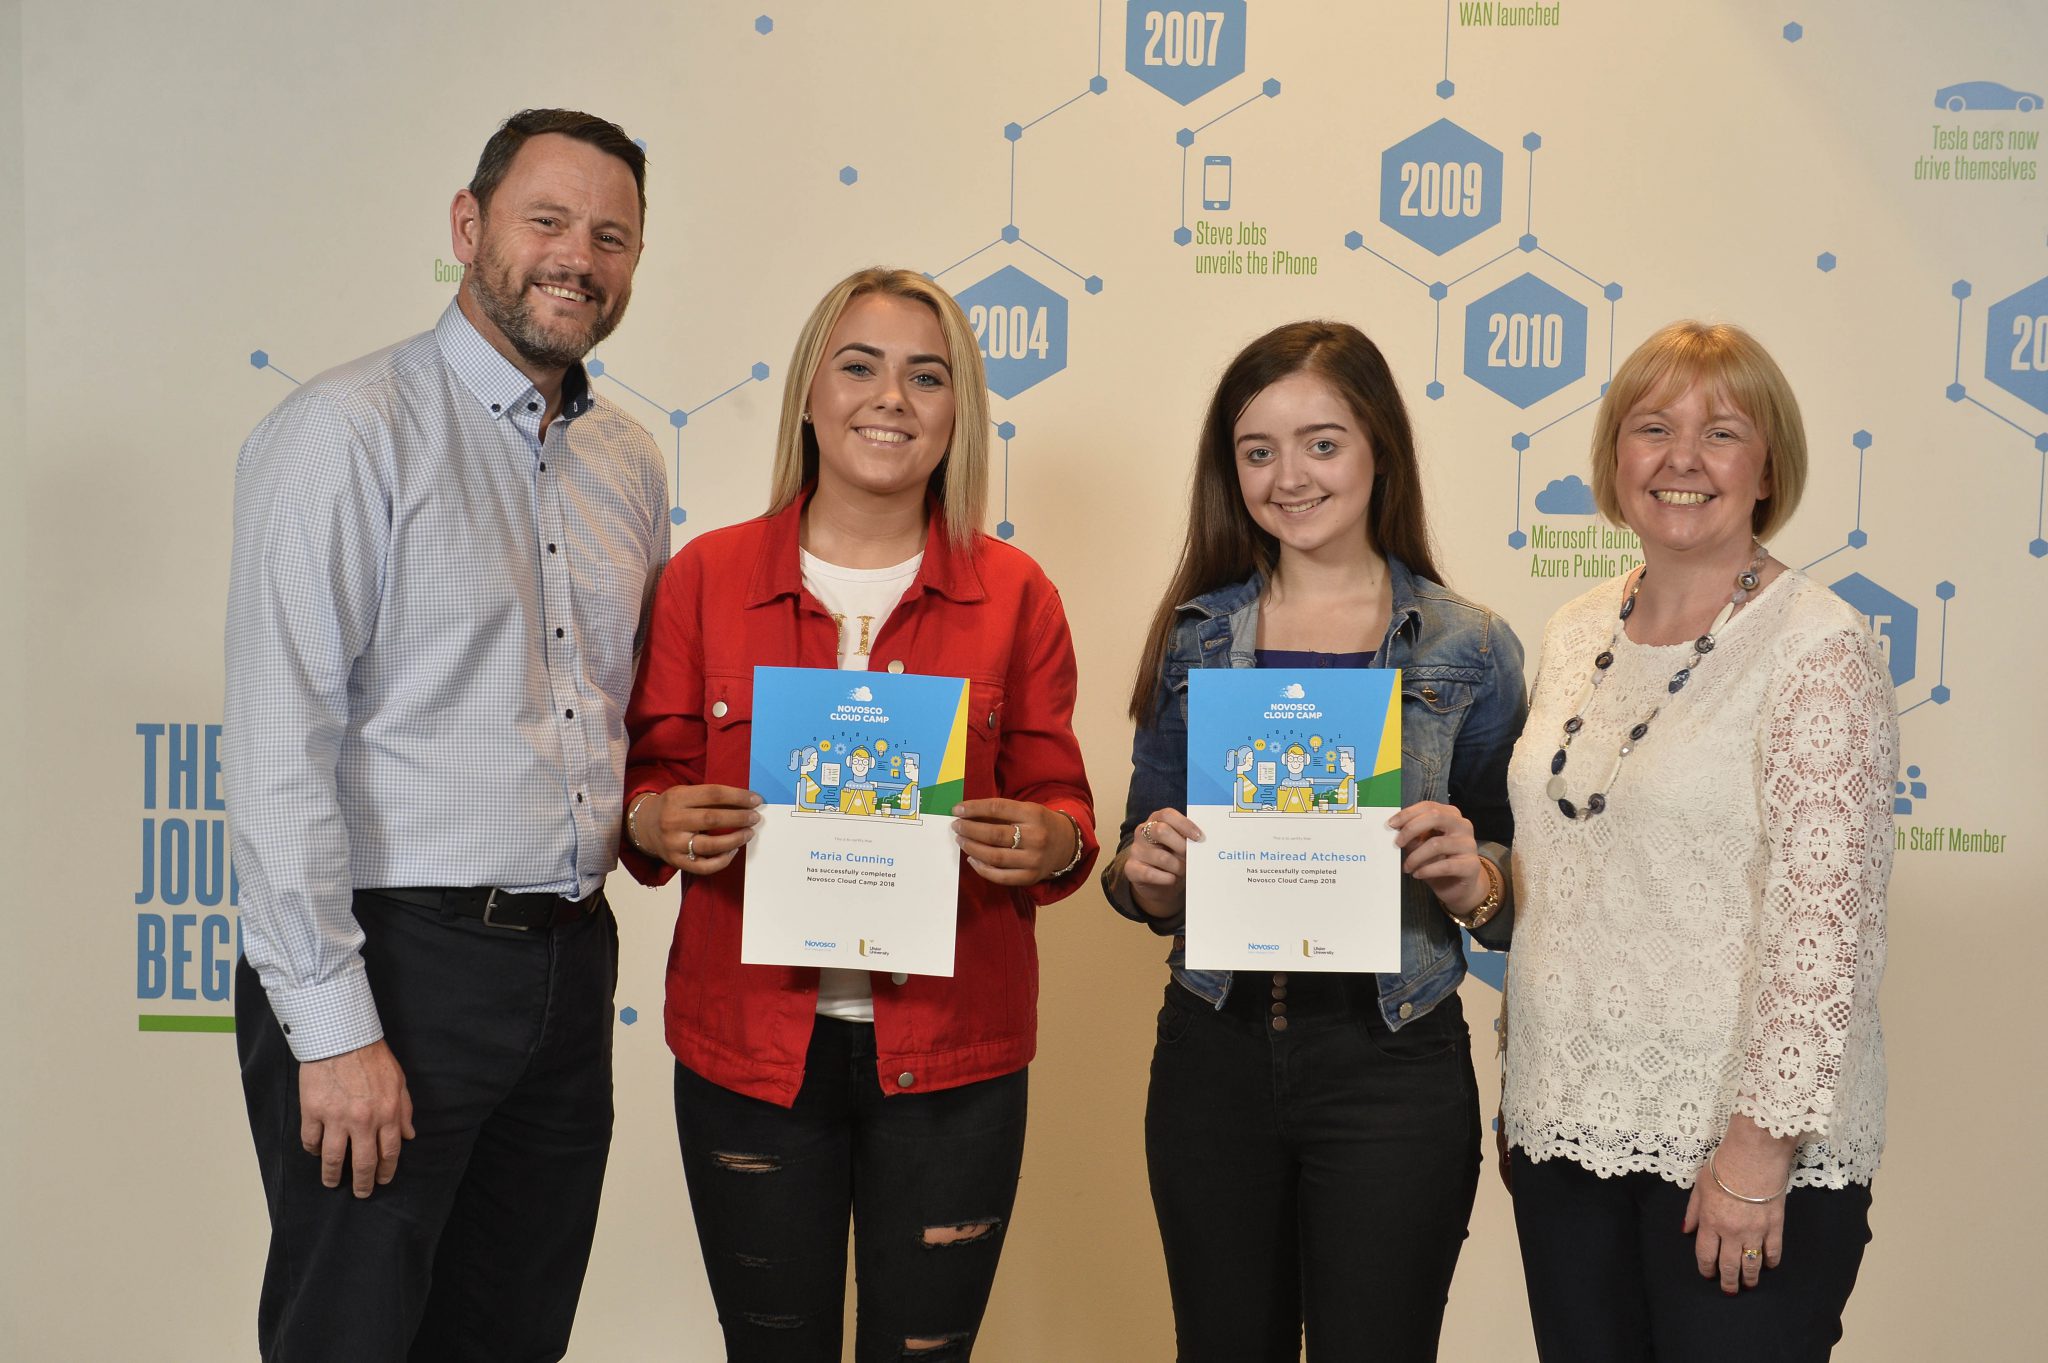 Ballymena students complete one of NI’s leading IT summer camps